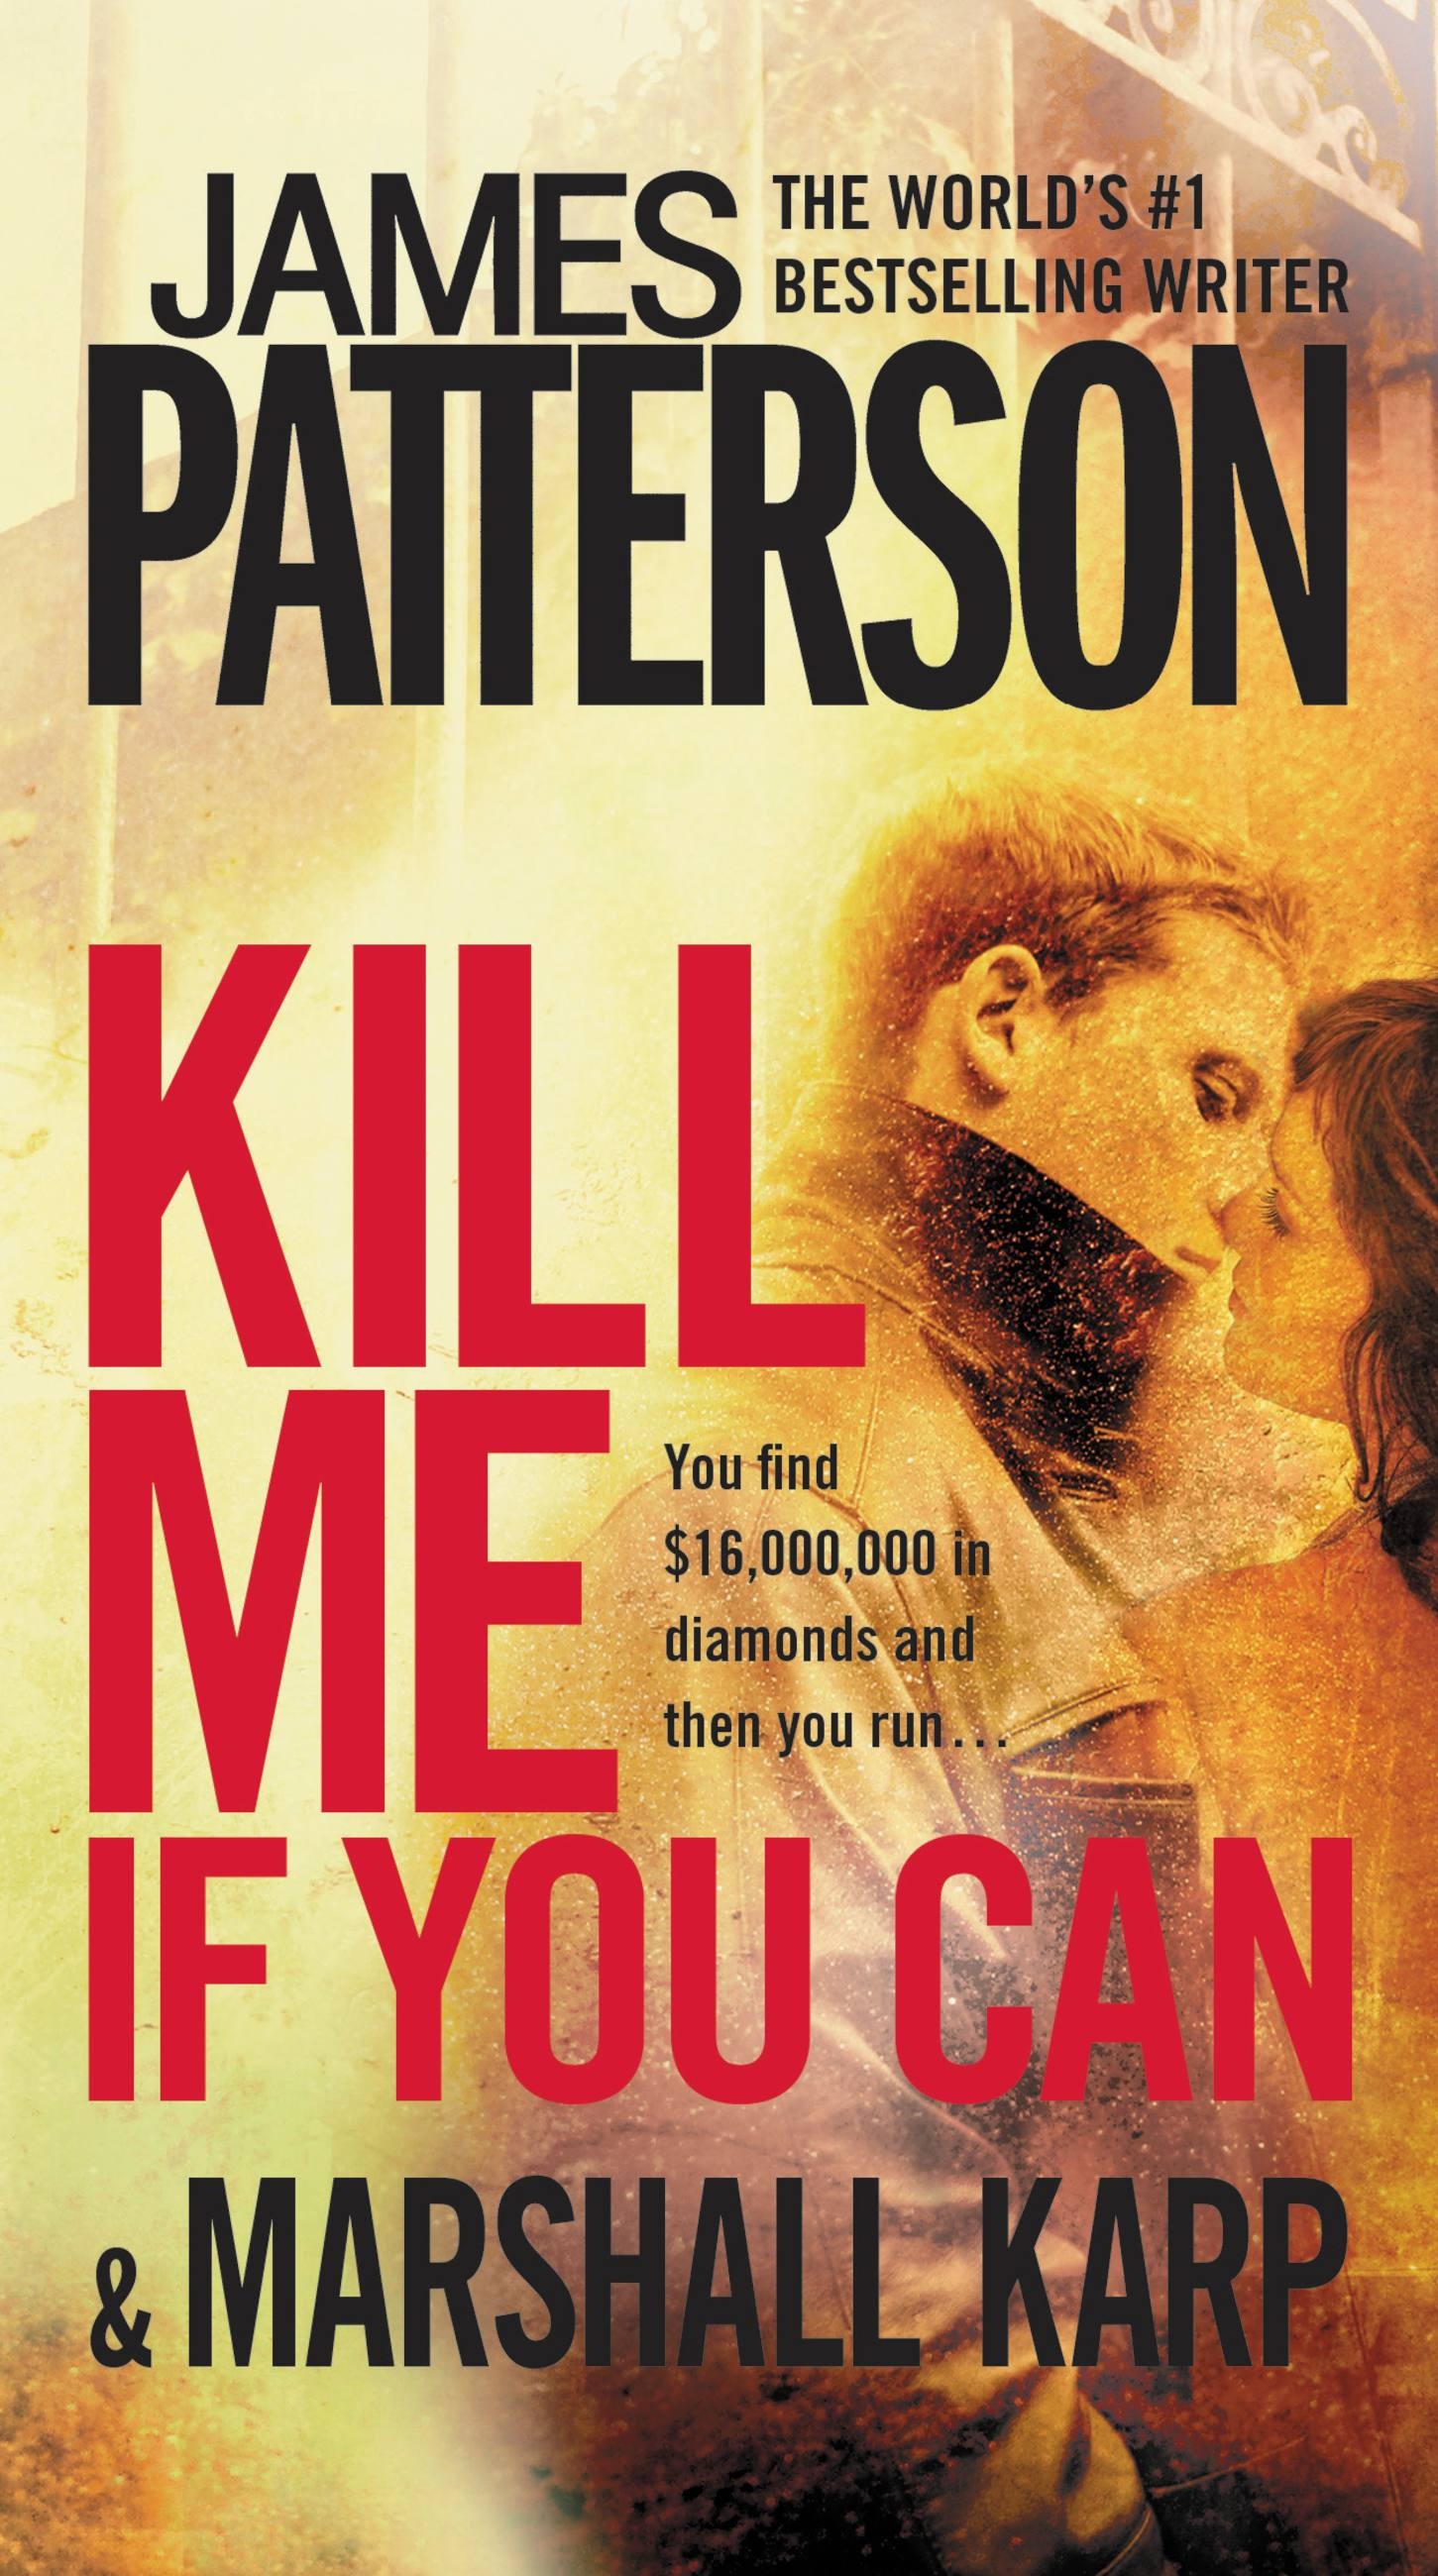 James Patterson Books Standalone Thrillers James Patterson